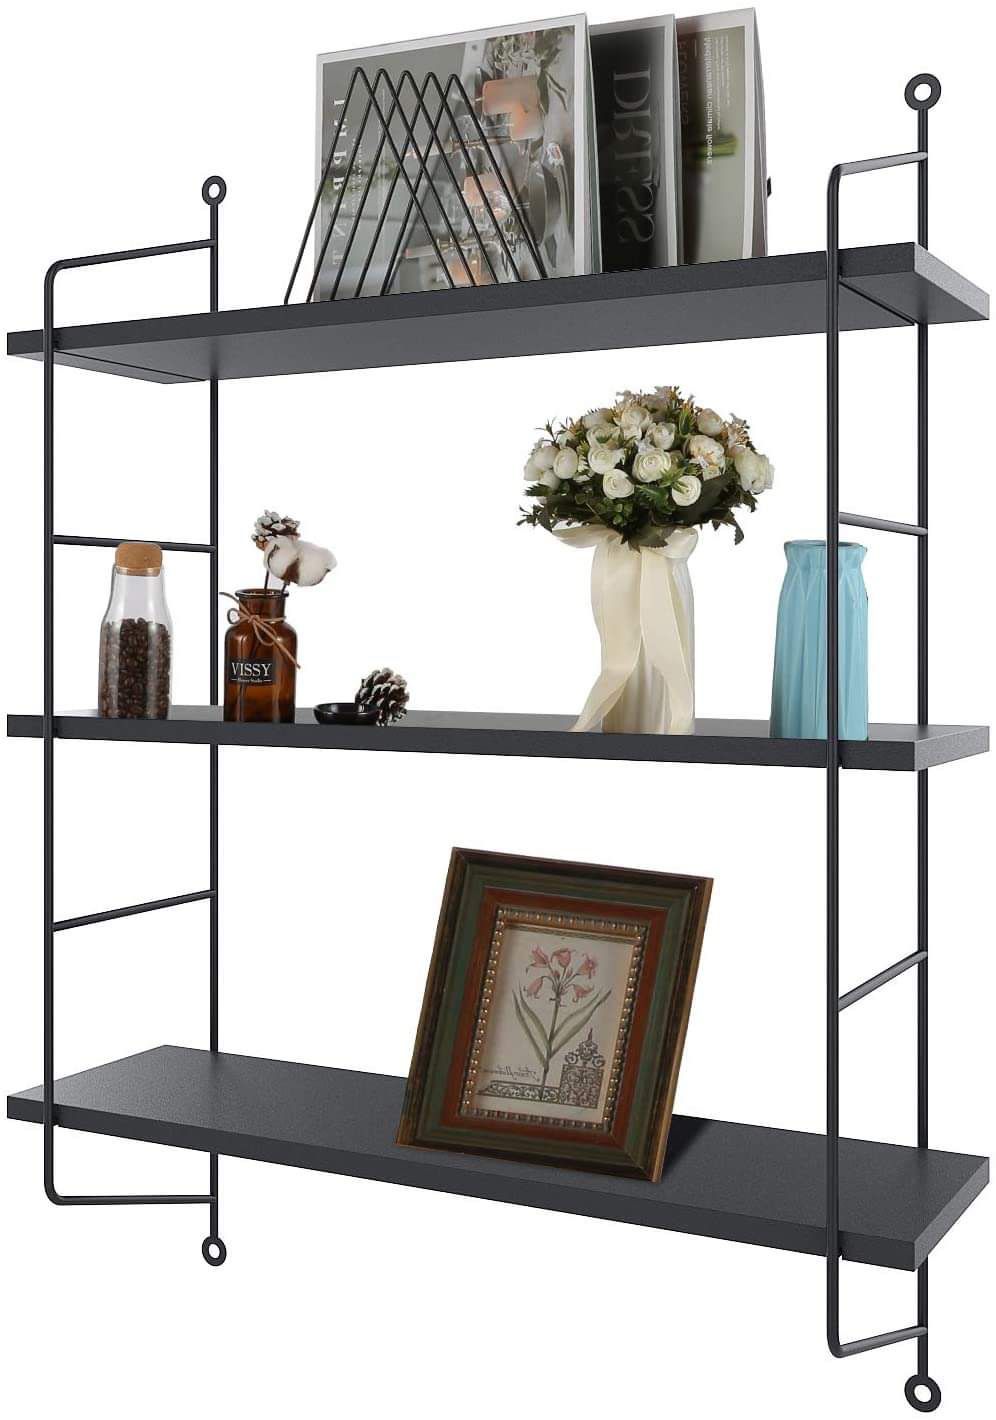 $80 (will not accept less)-Both of them as a set-!--3 Tier Black Wall Shelves- paid just over $160 all together- no none of the knickknacks are includ